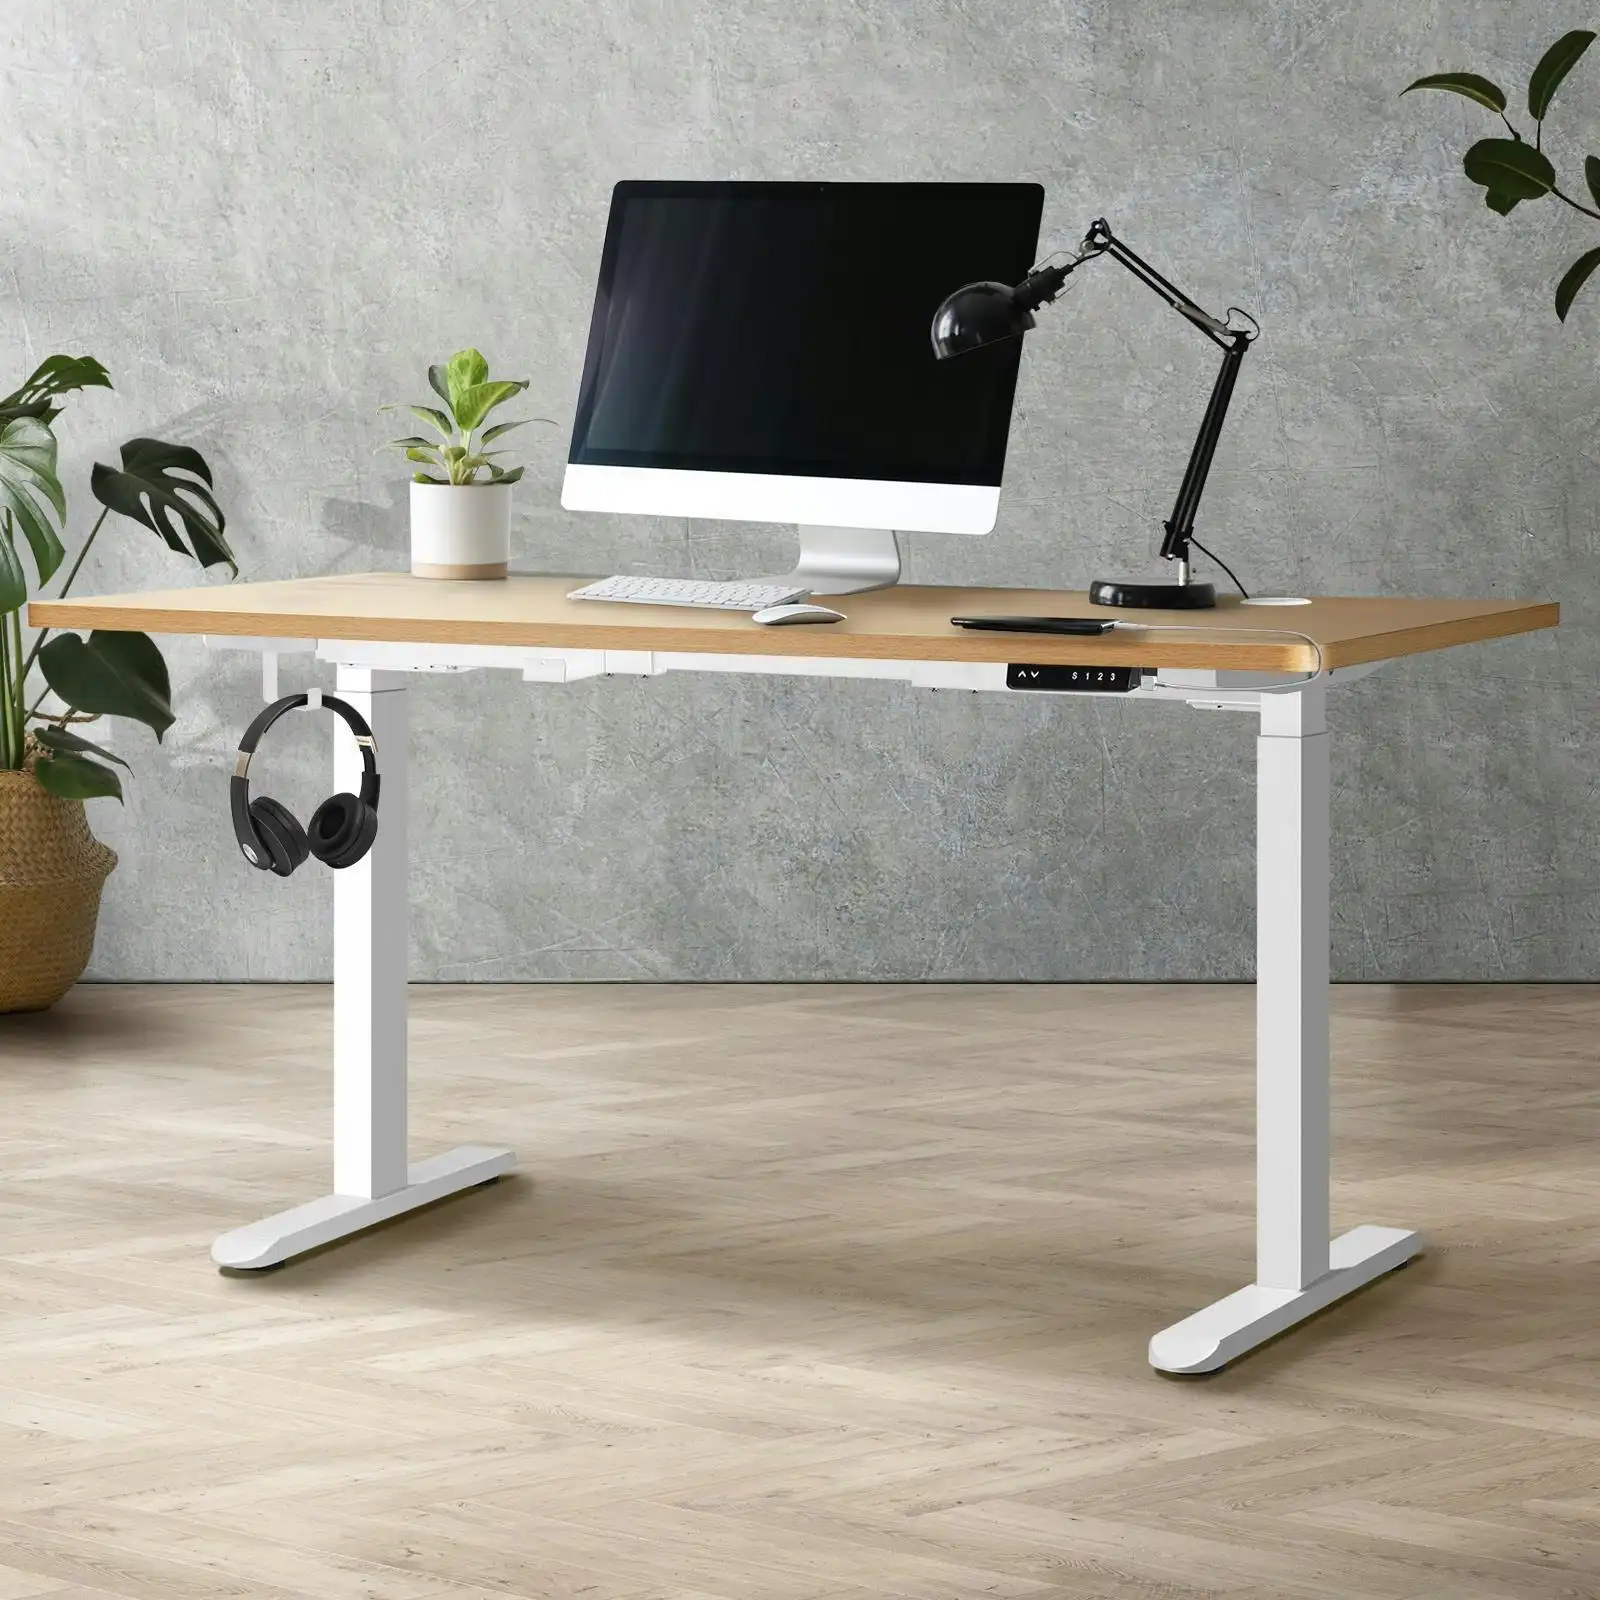 Oikiture 120cm Electric Standing Desk Dual Motor White Frame OAK Desktop With USB&Type C Port